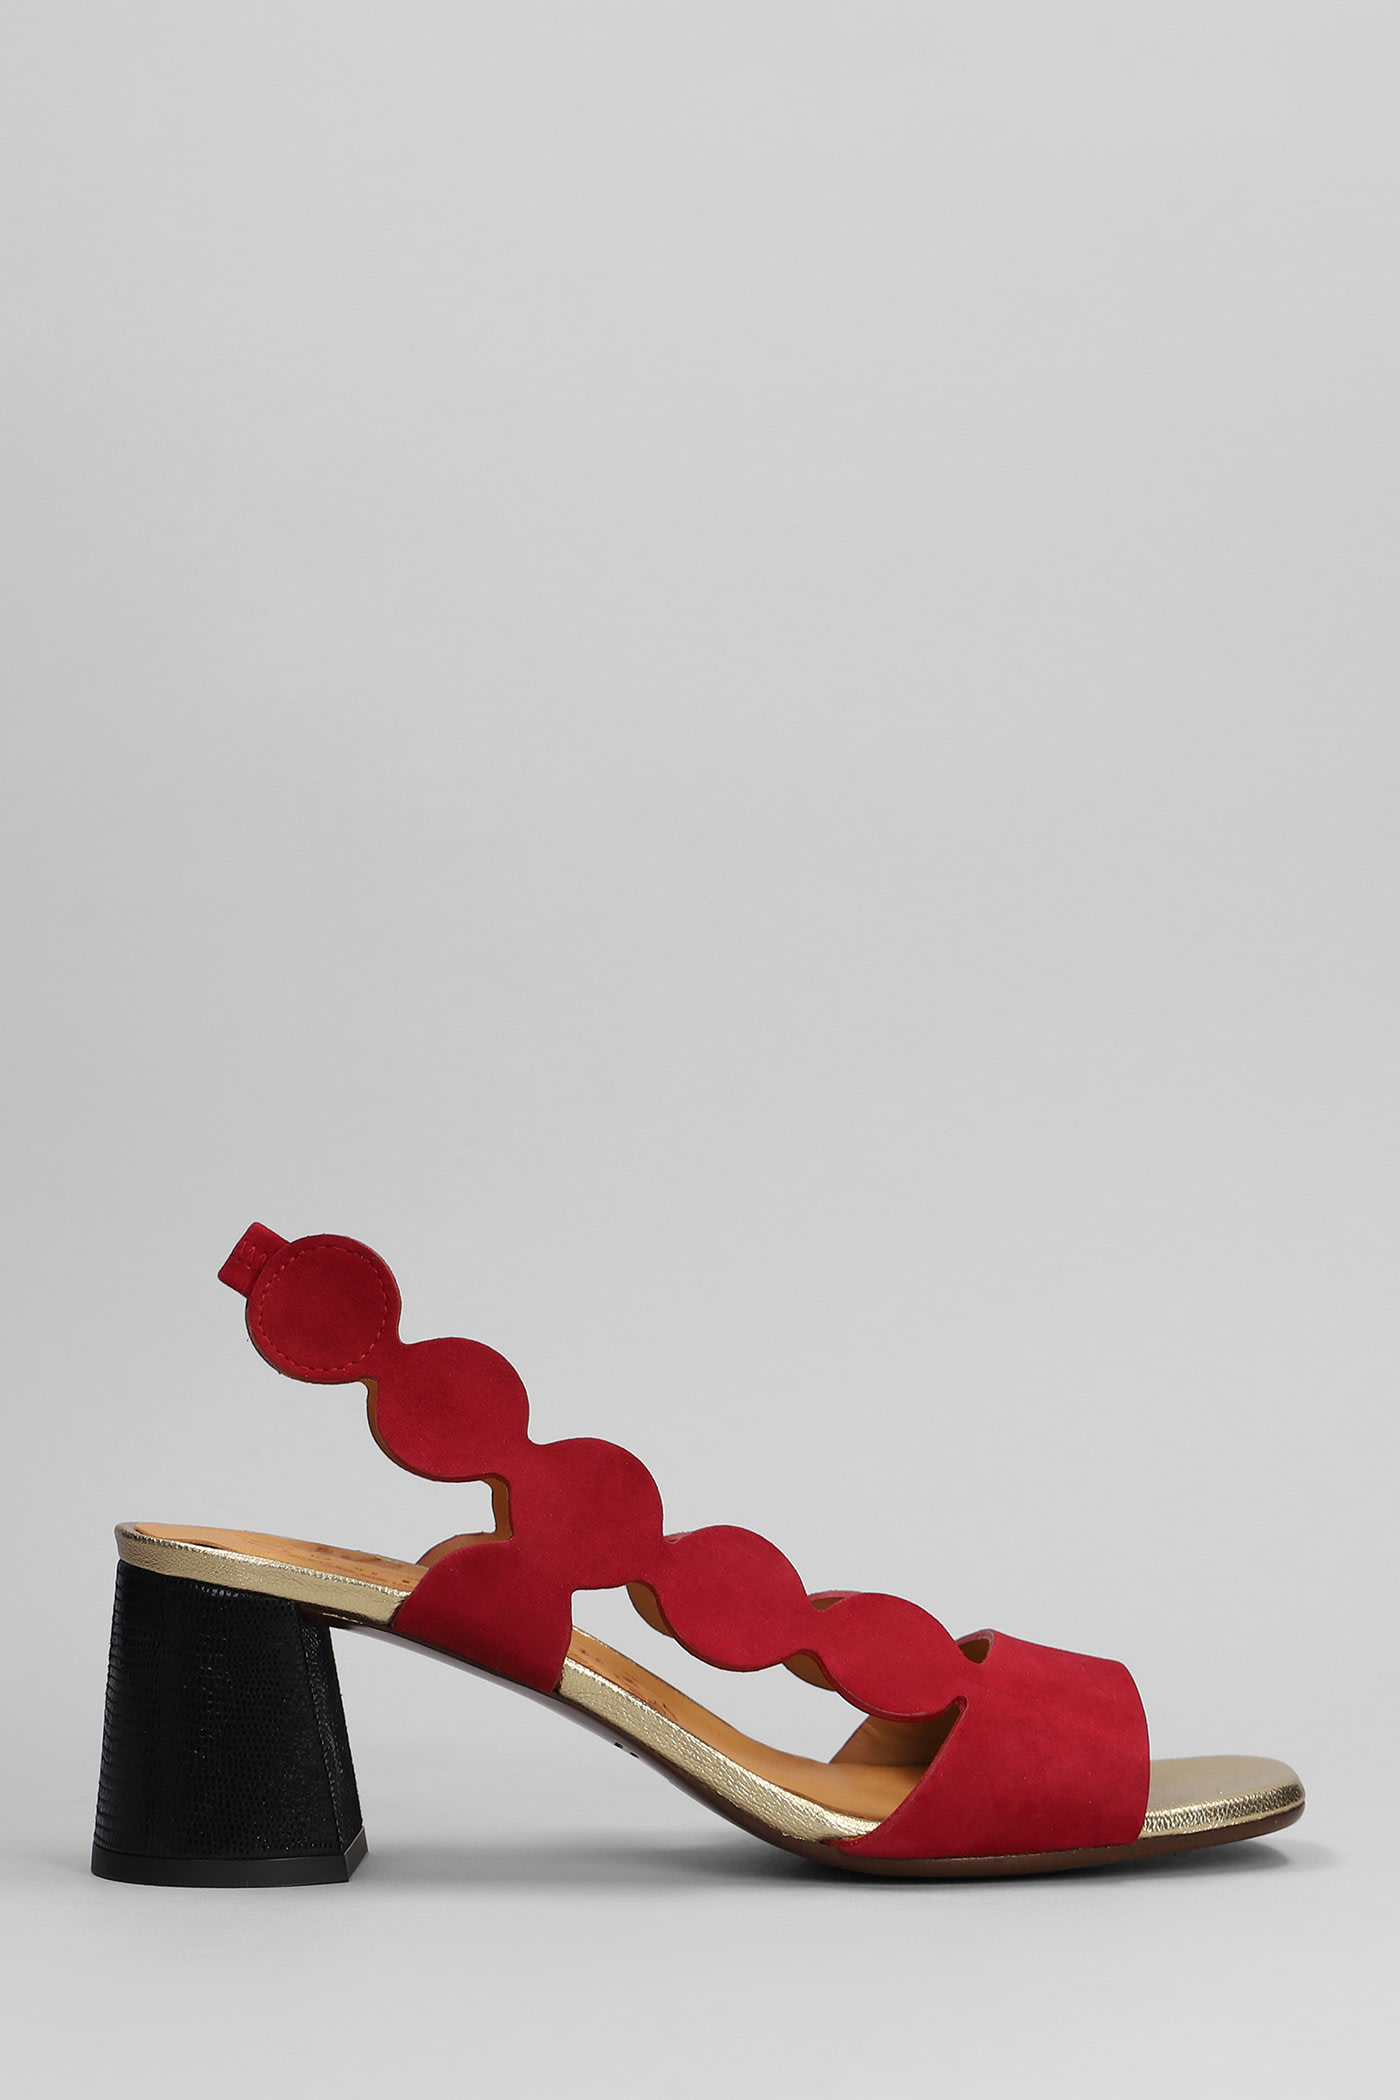 CHIE MIHARA ROKA SANDALS IN RED SUEDE